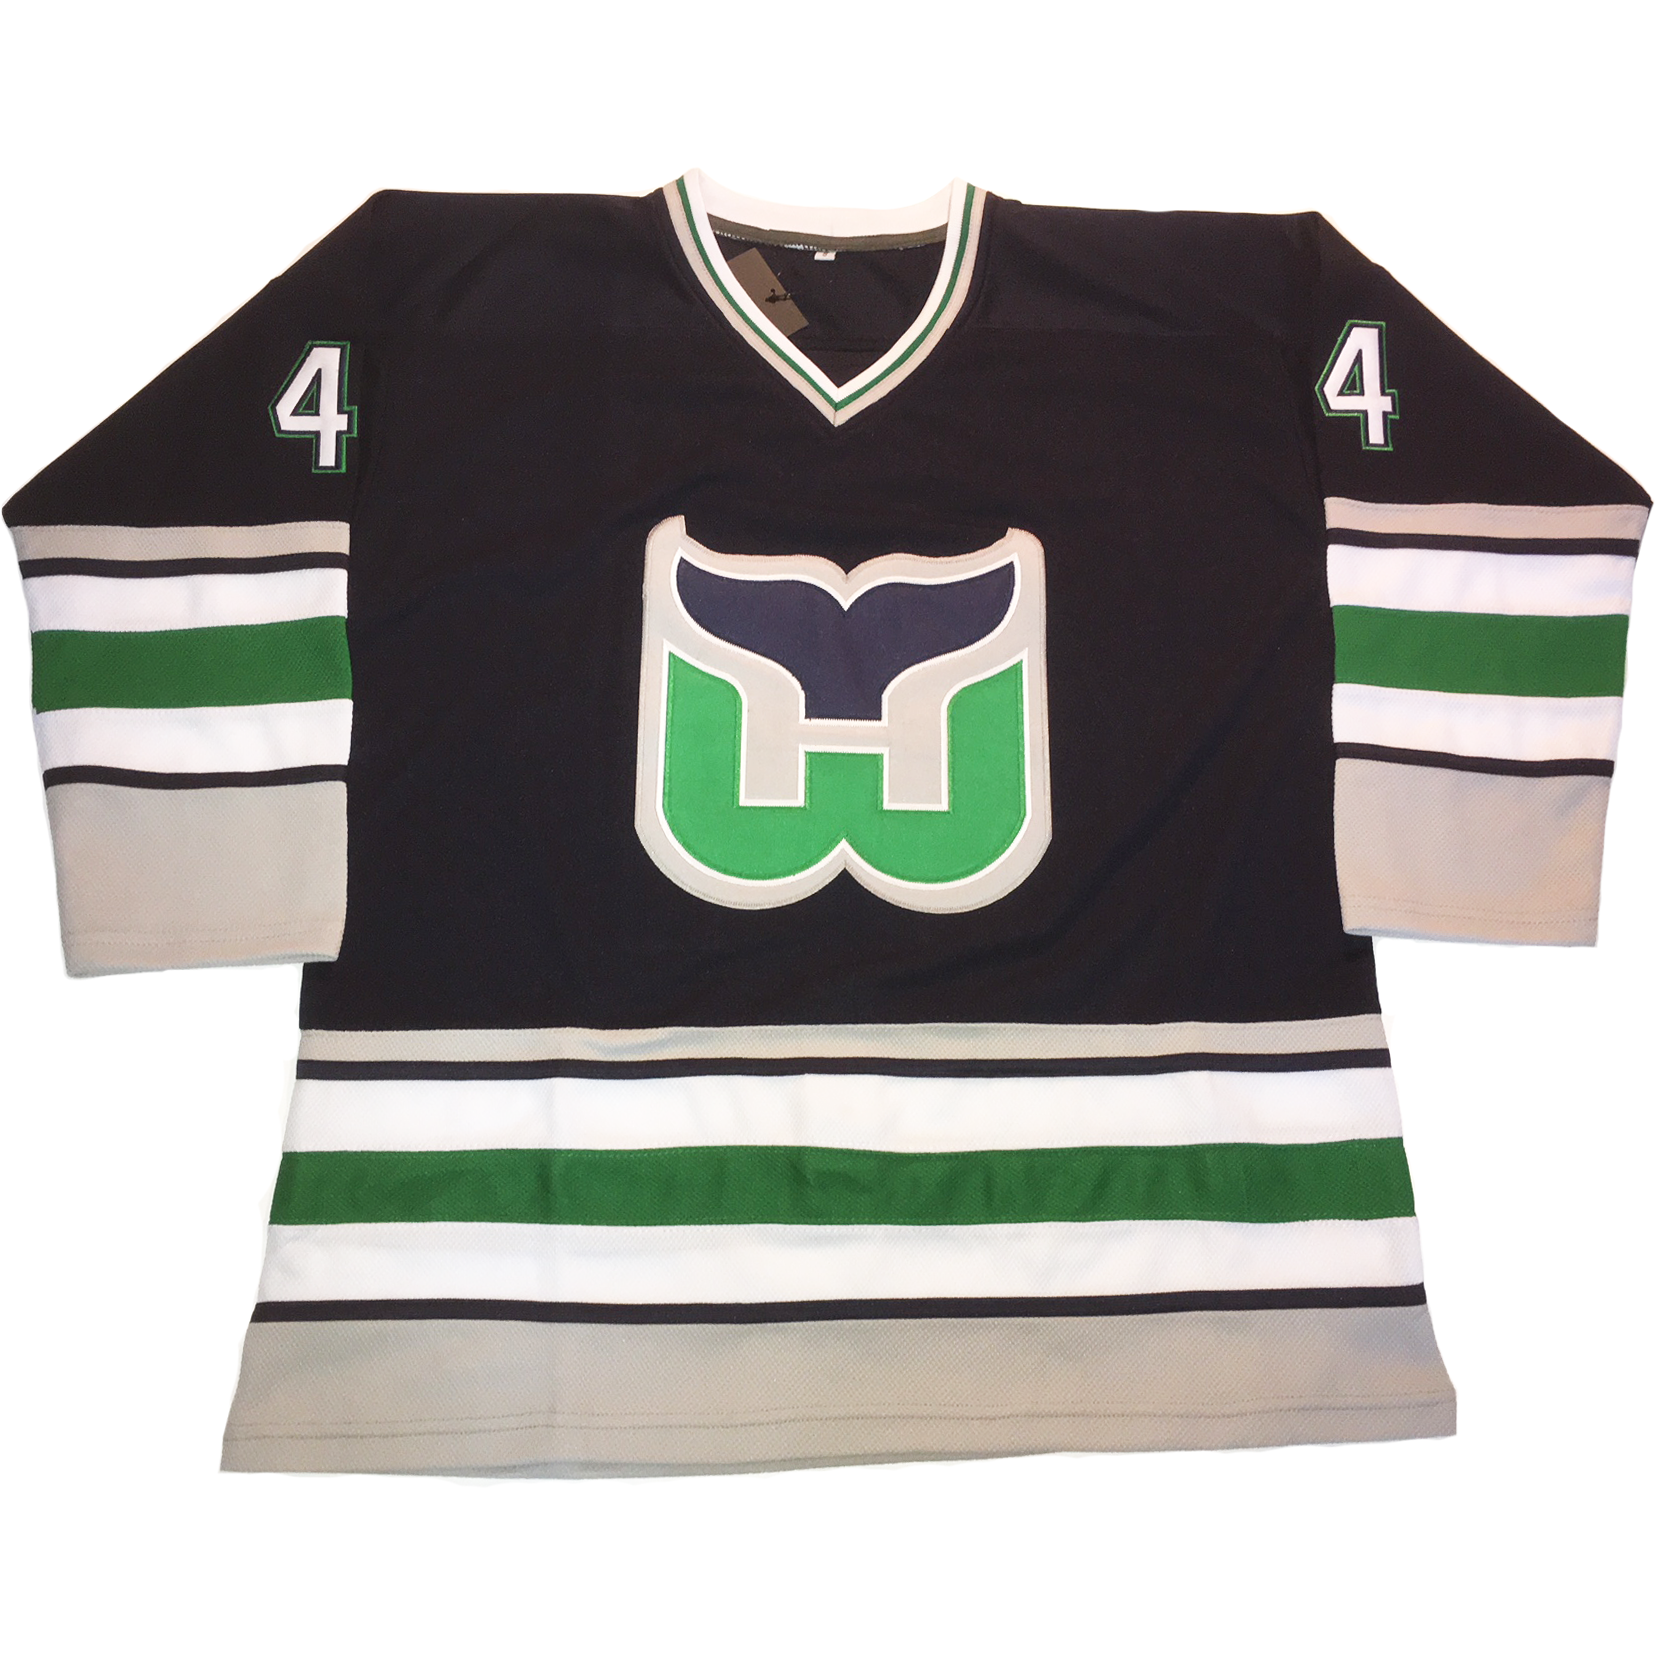 New England Whalers Jersey – Royal Retros